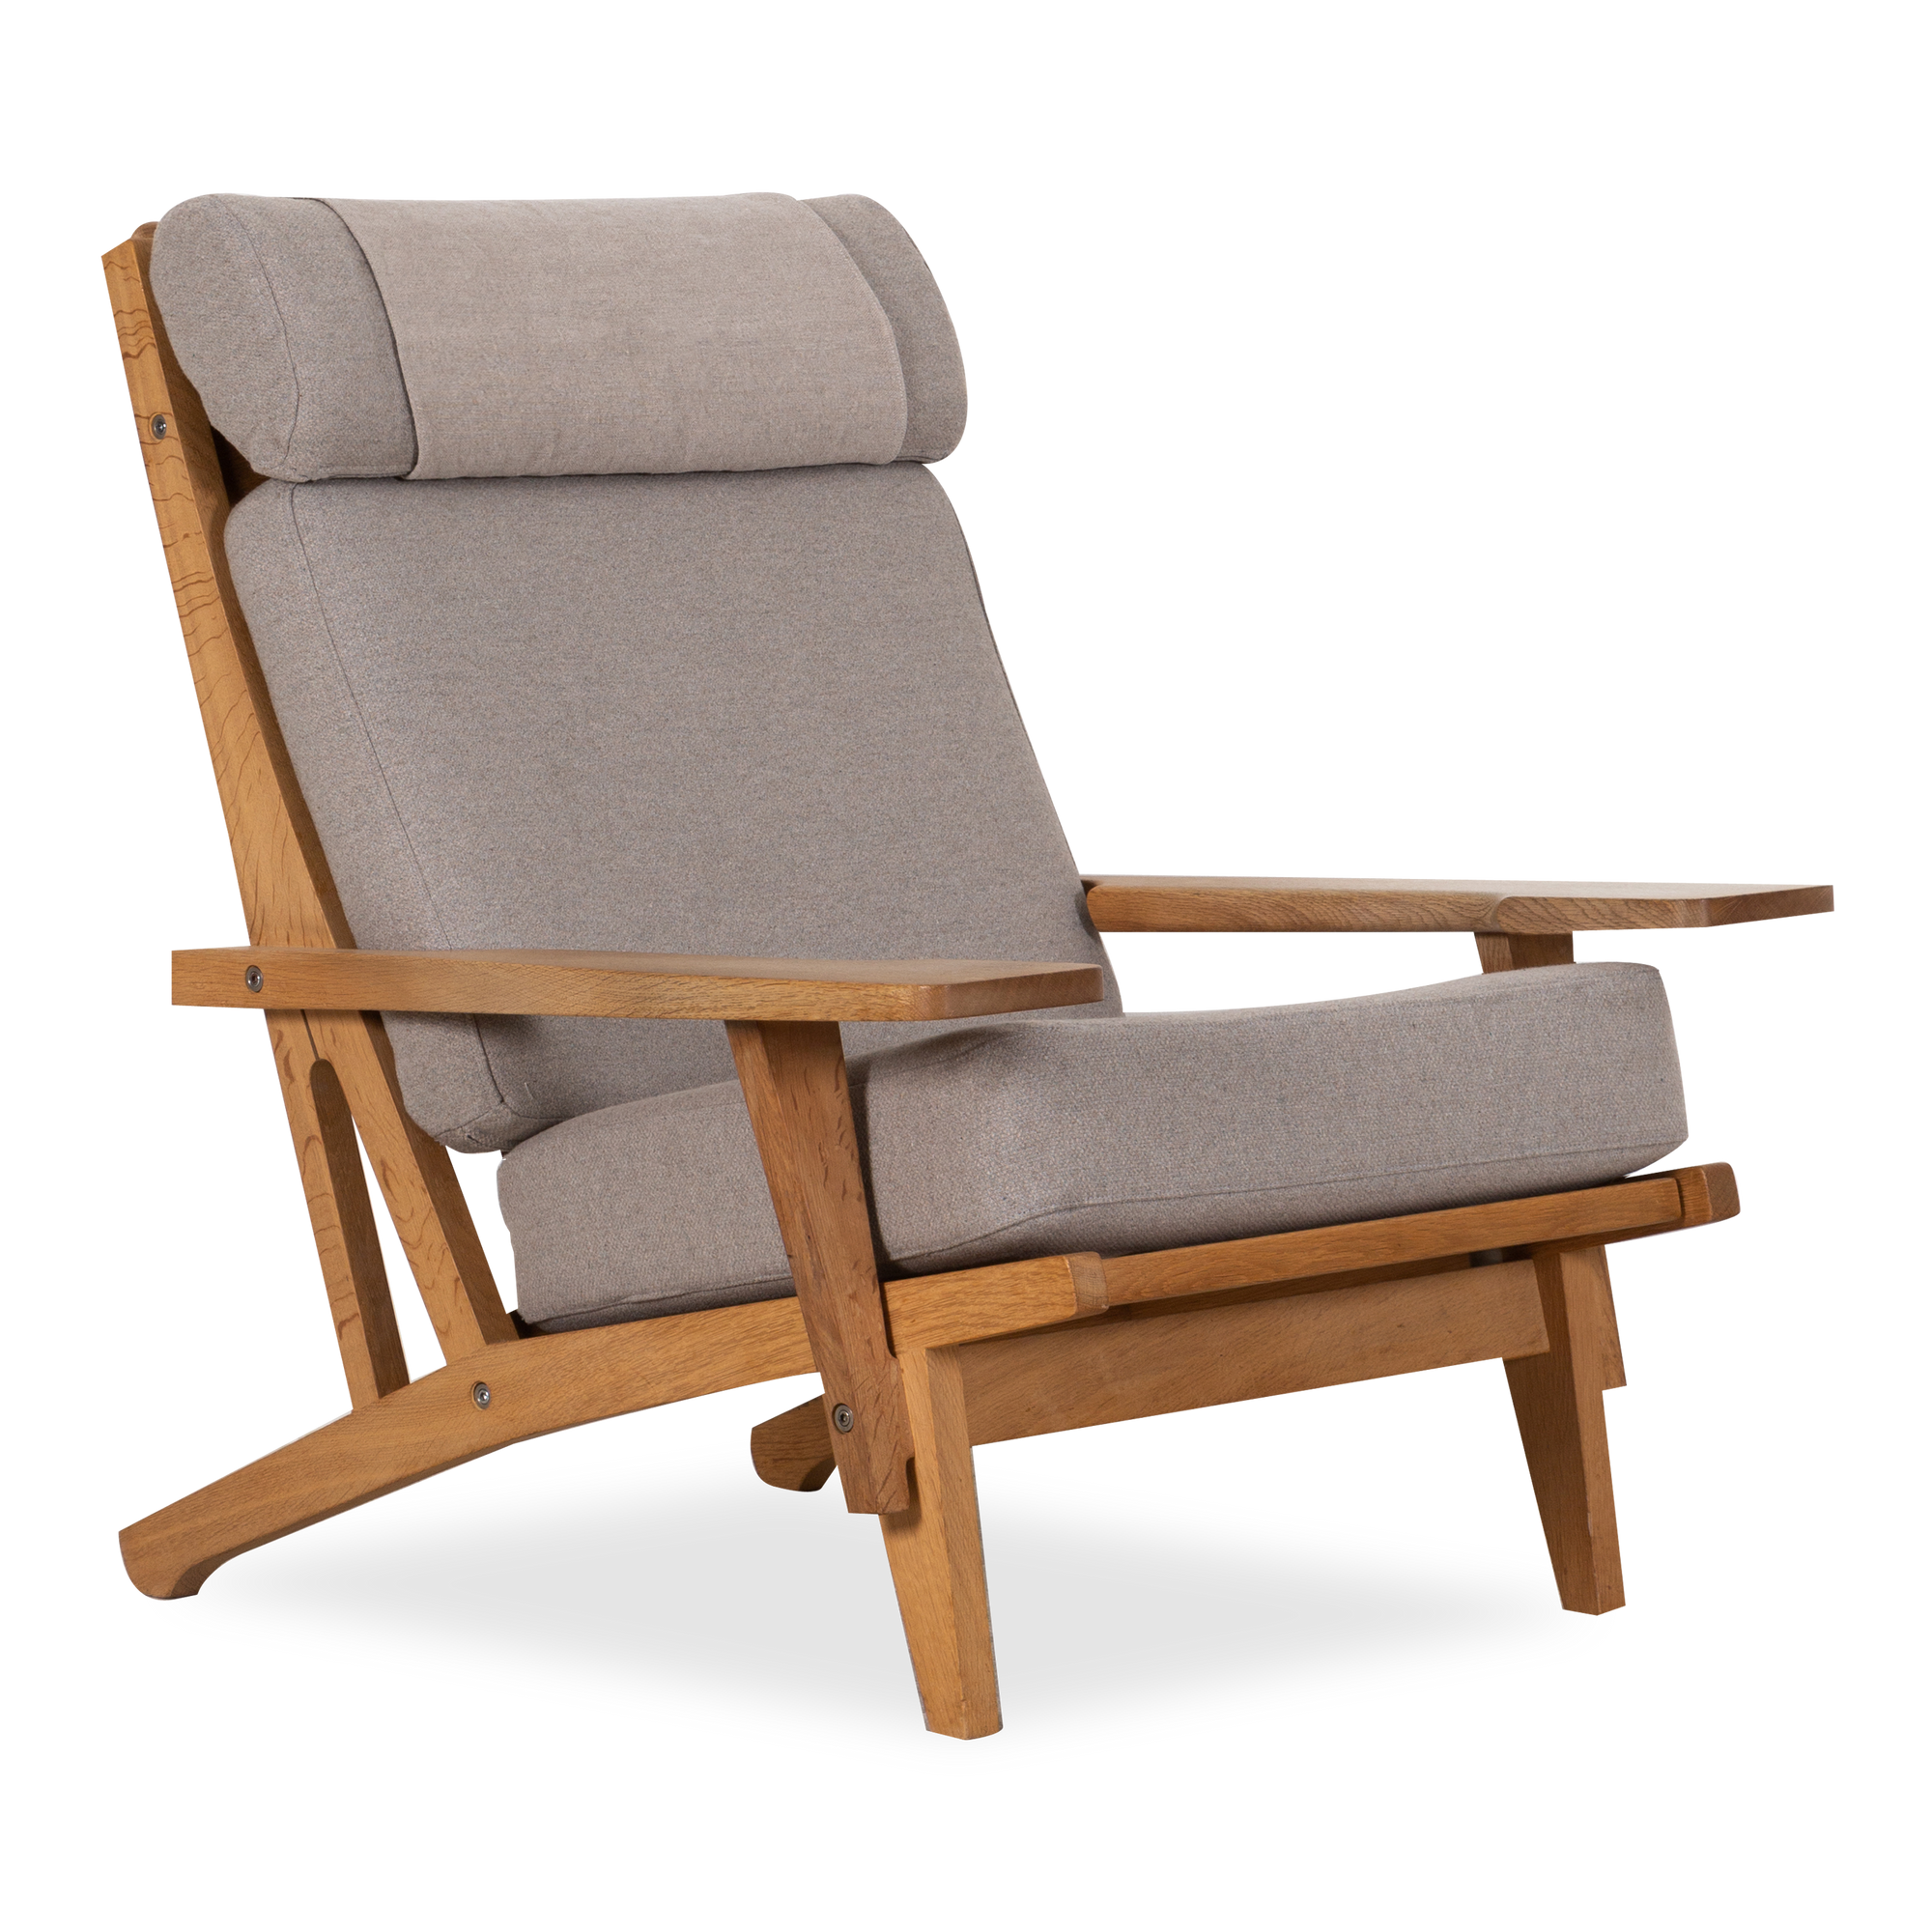 An iconic lounge chair, this vintage GE-375 Easy Armchair was designed by Hans Wegner and manufactured by GETAMA, circa 1960s.